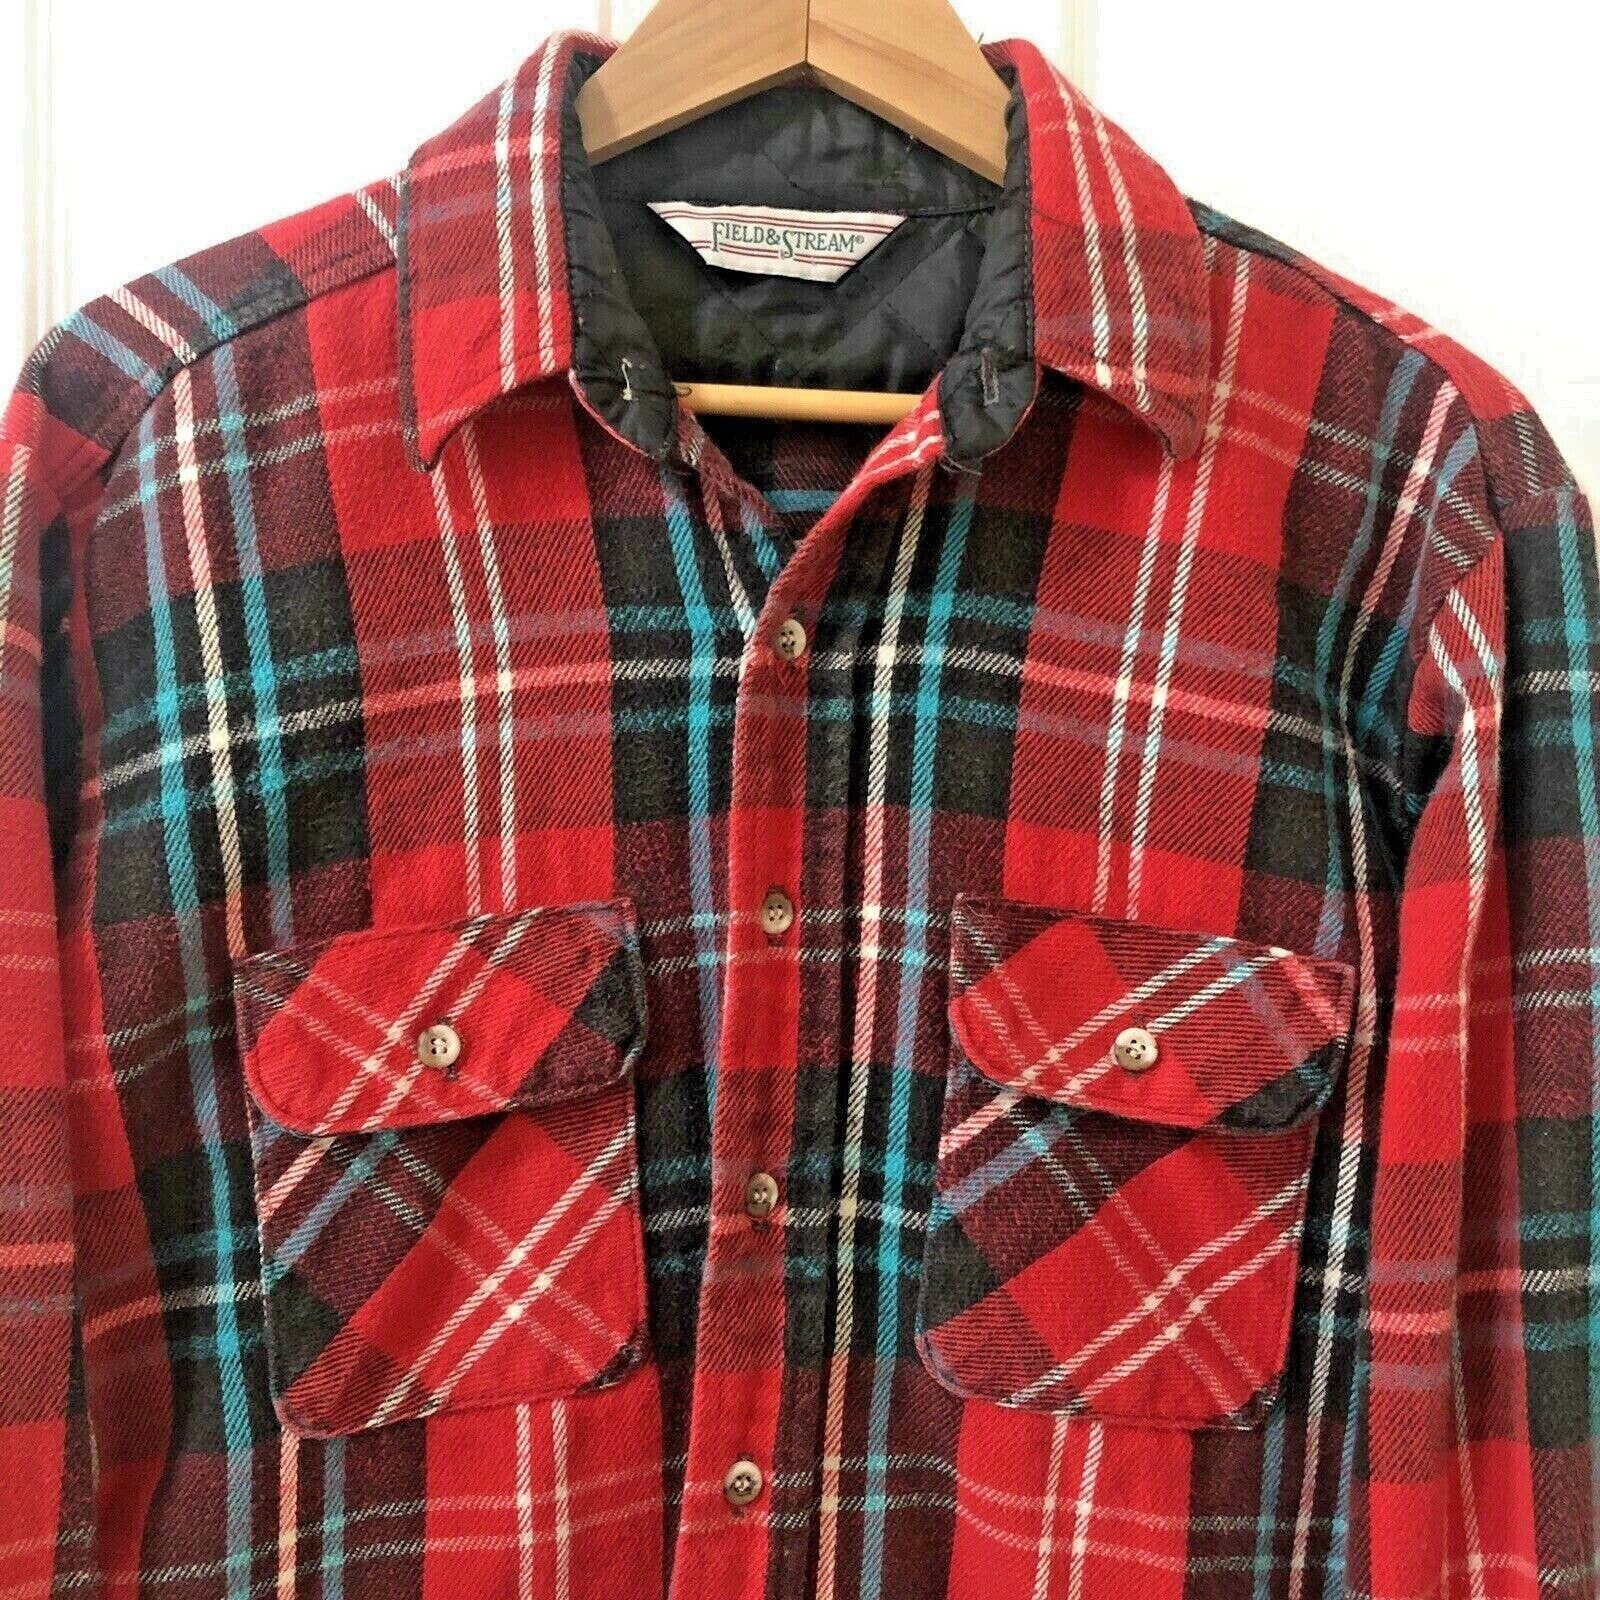 Field And Stream Vintage Field & Stream L Heavy Flannel Red Plaid Made USA Size US L / EU 52-54 / 3 - 1 Preview